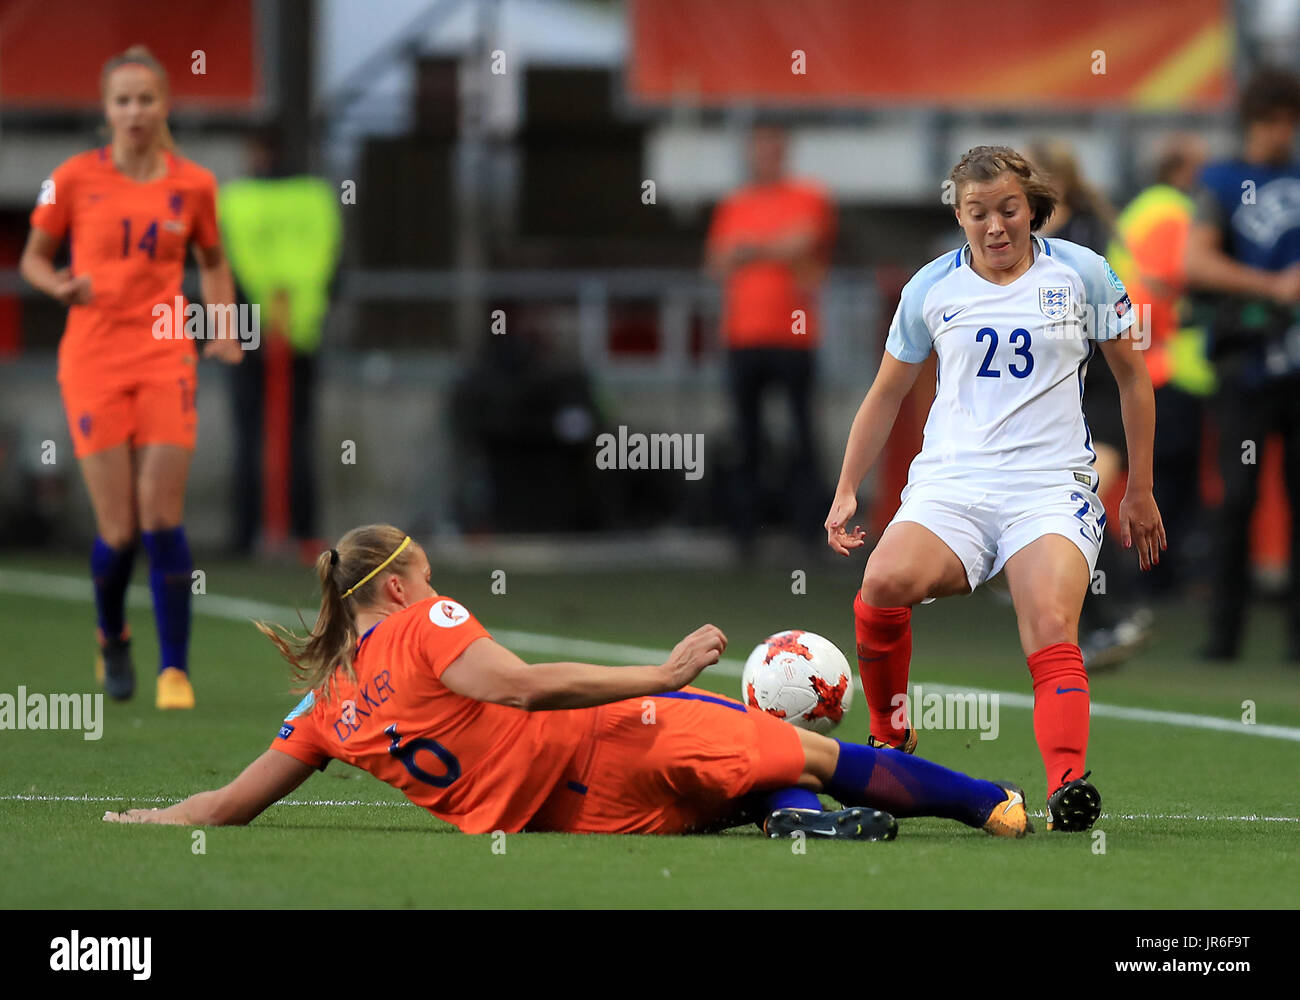 Netherland's Anouk Dekker (left) and England's Francesca Kirby (right) battle for the ball during the UEFA Women's Euro 2017 match at the De Grolsch Veste, Enschede. Stock Photo